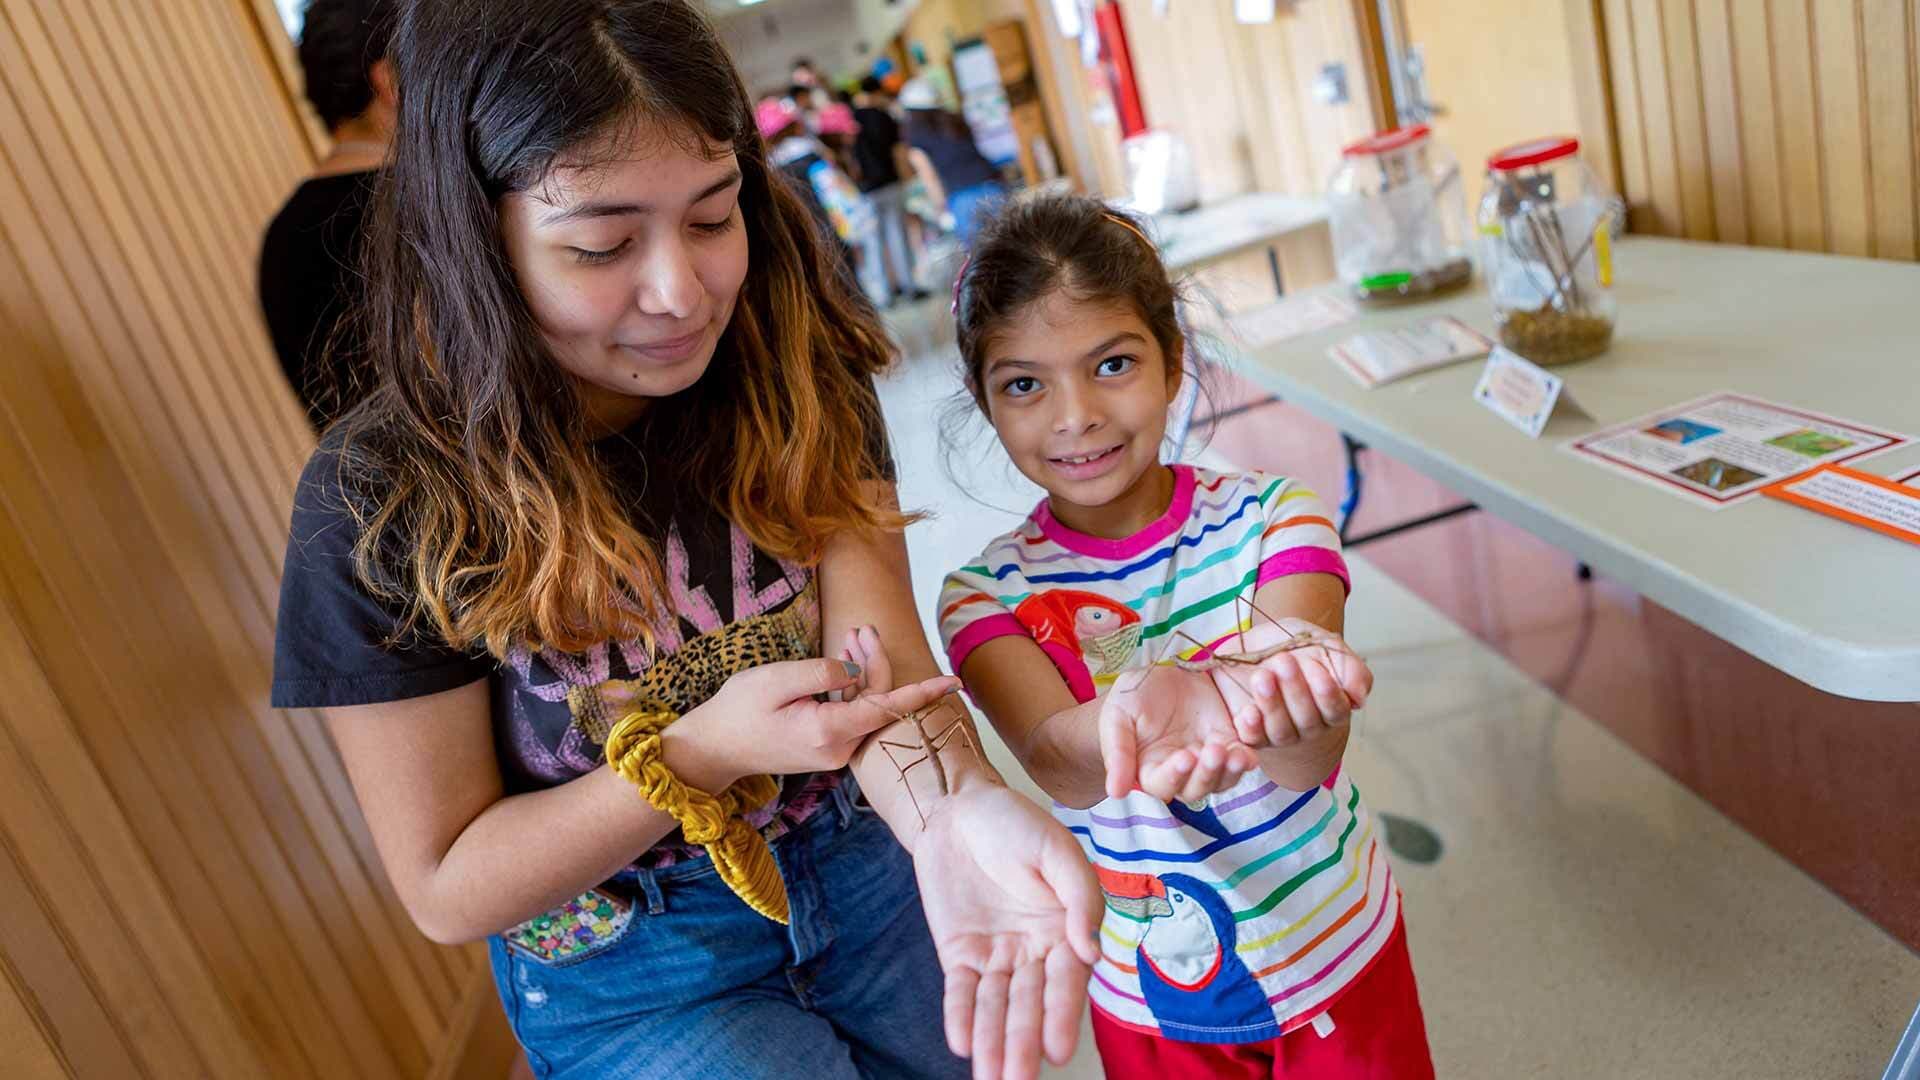 Two visitors at the insect petting zoo